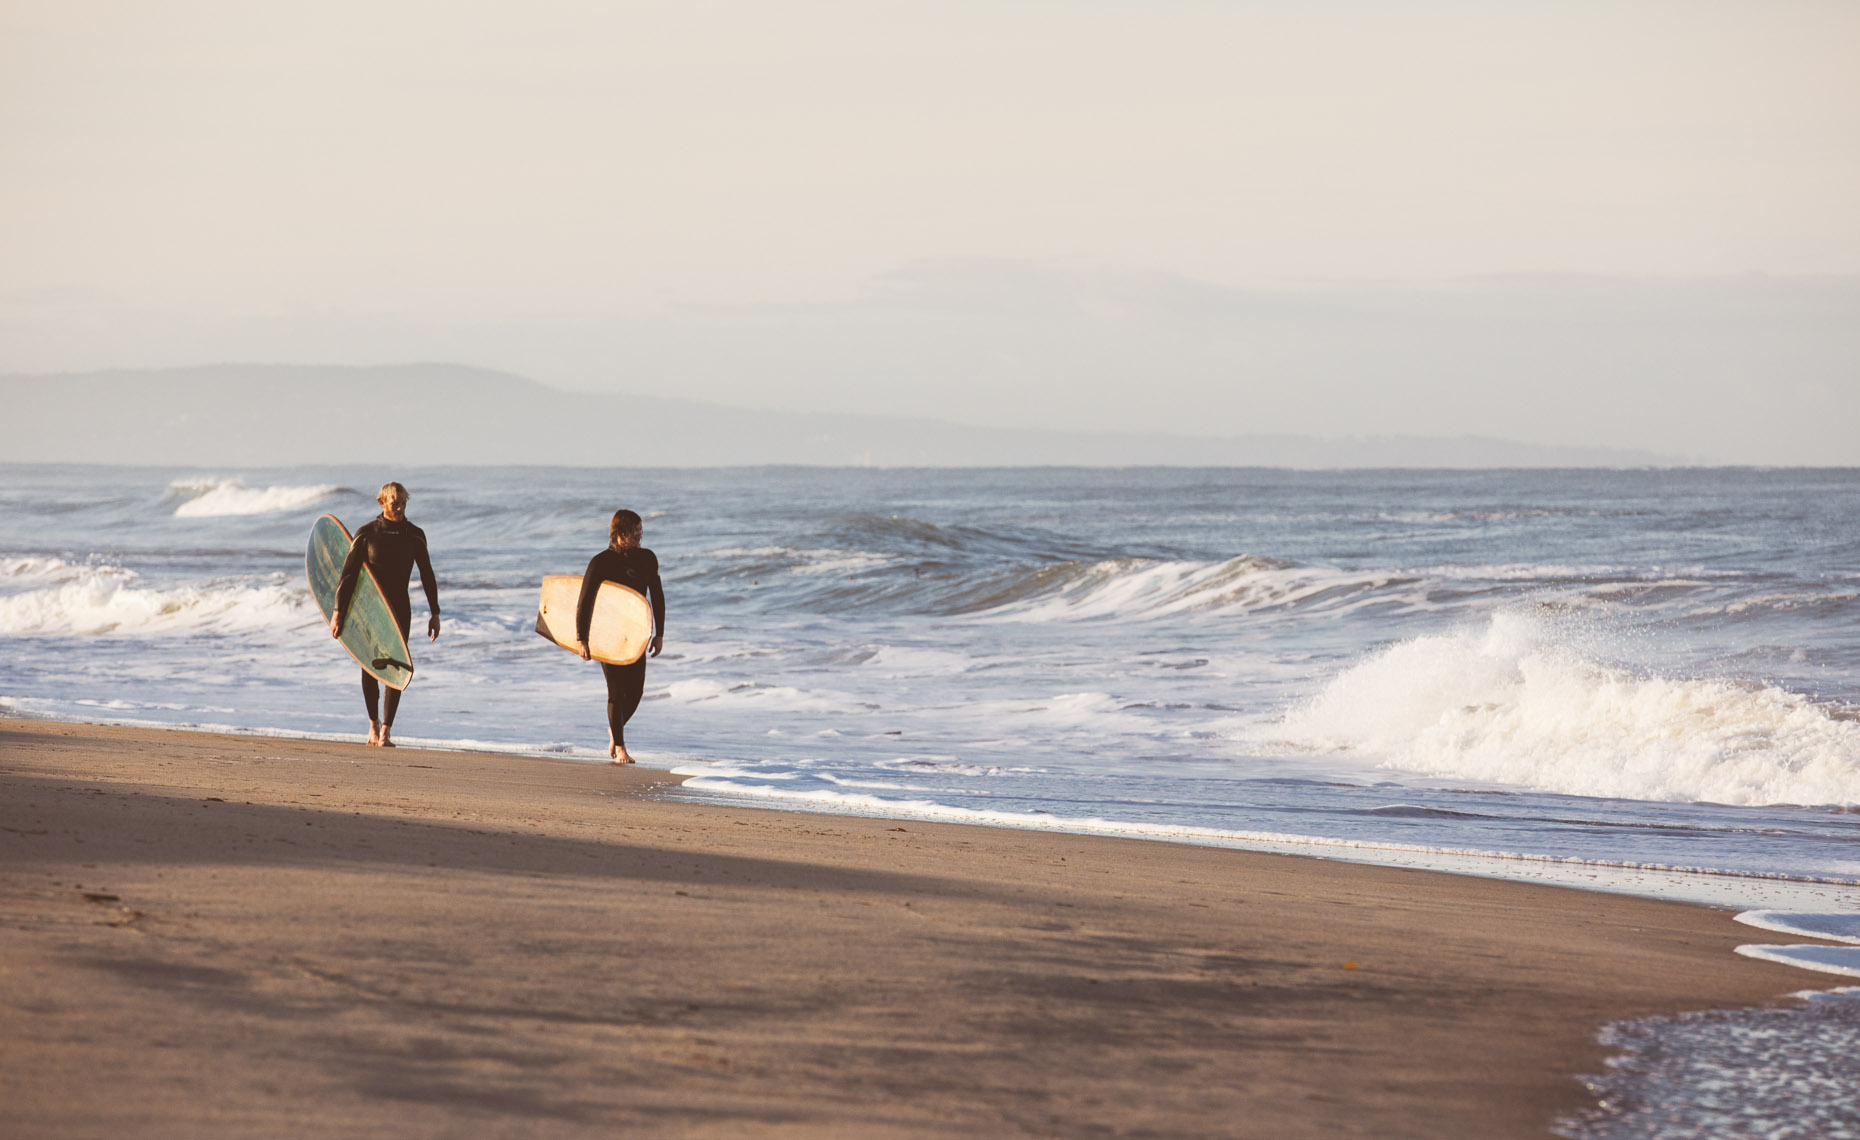 Two surfers with wooden surfboards built by Martijn Stiphout from Ventana Surfboards walking on a beach in Northern California